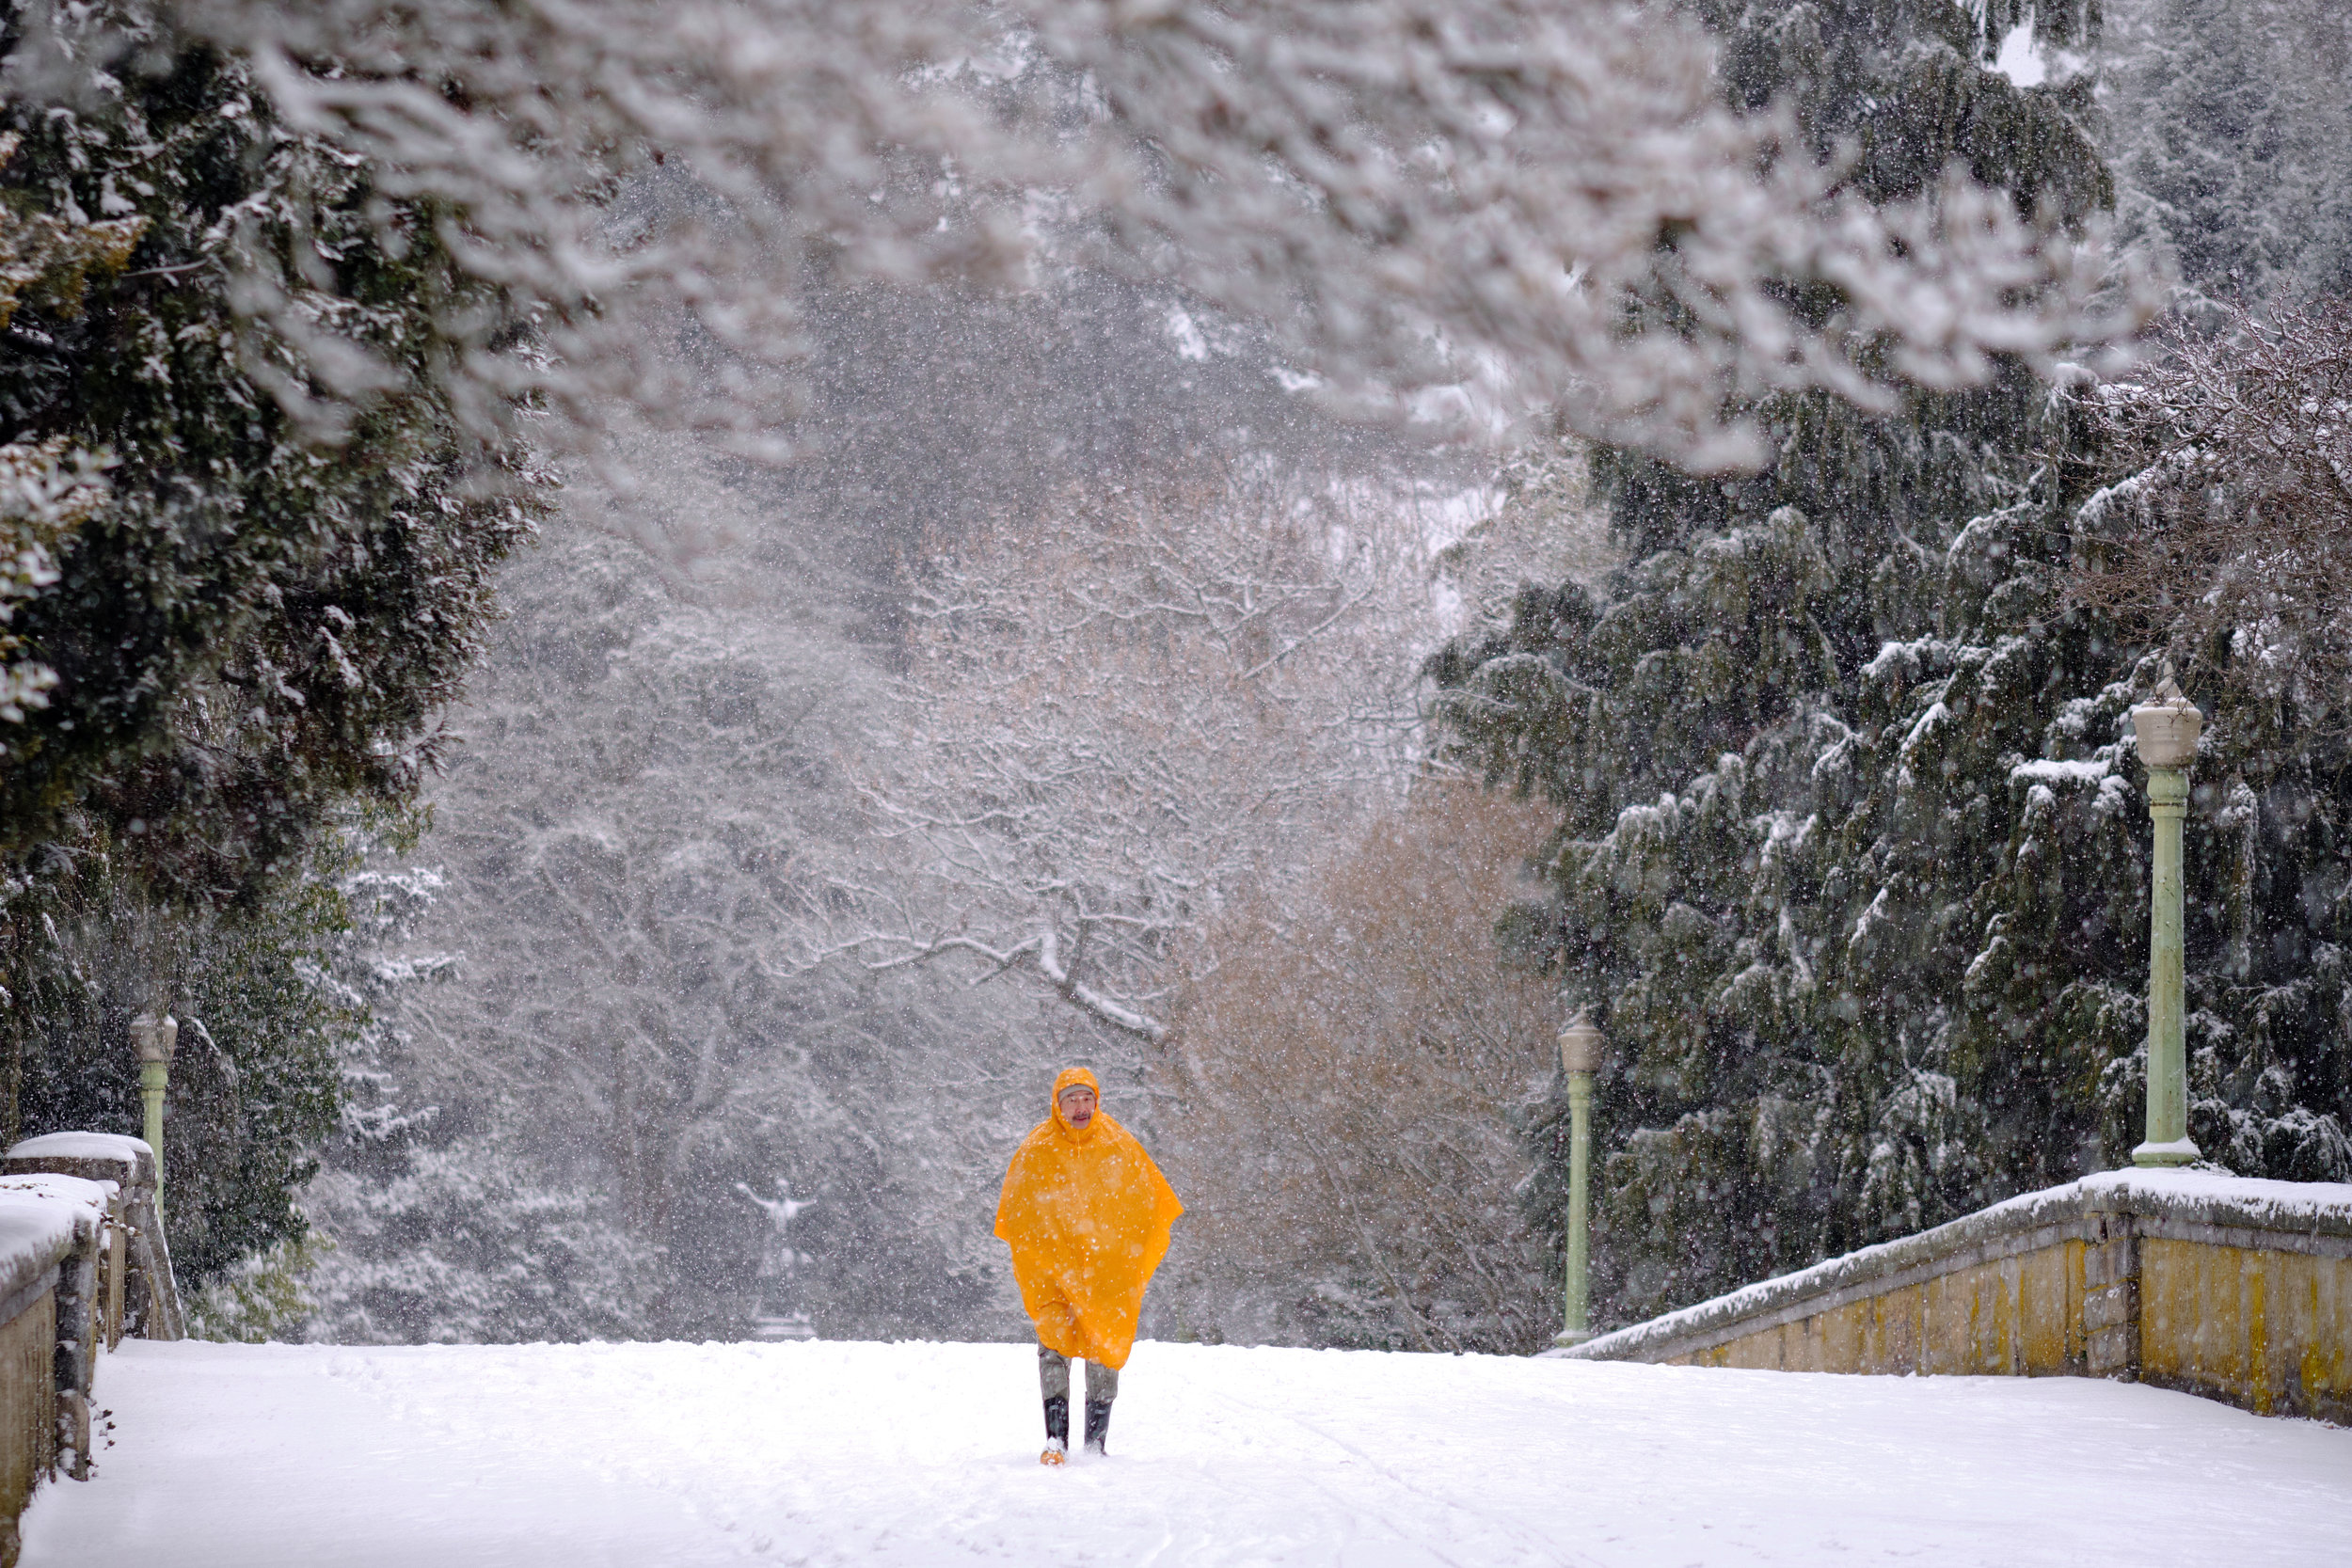 A snow storm hits Stanley Park in Vancouver. A man in a yellow rain coat walks on the bridge by Coal Harbour